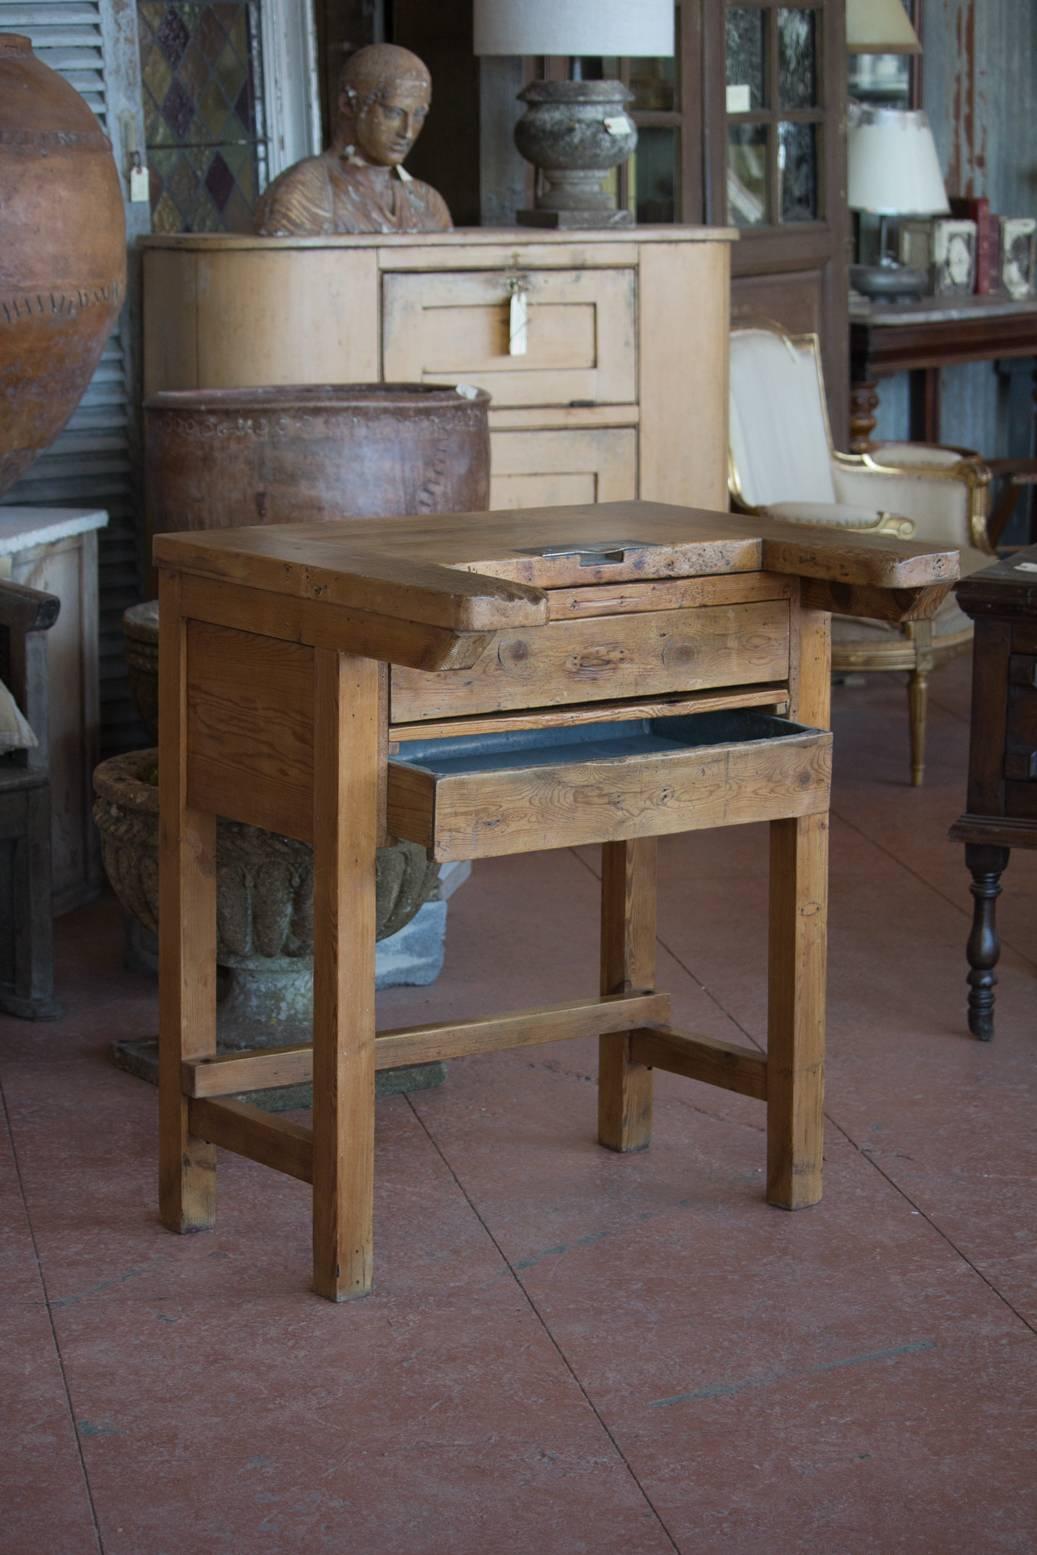 Rare antique English watchmakers desk. It has an unusual shape top for arm rests, drawer, pull-out shelf and a zinc lined drawer to catch the bits!